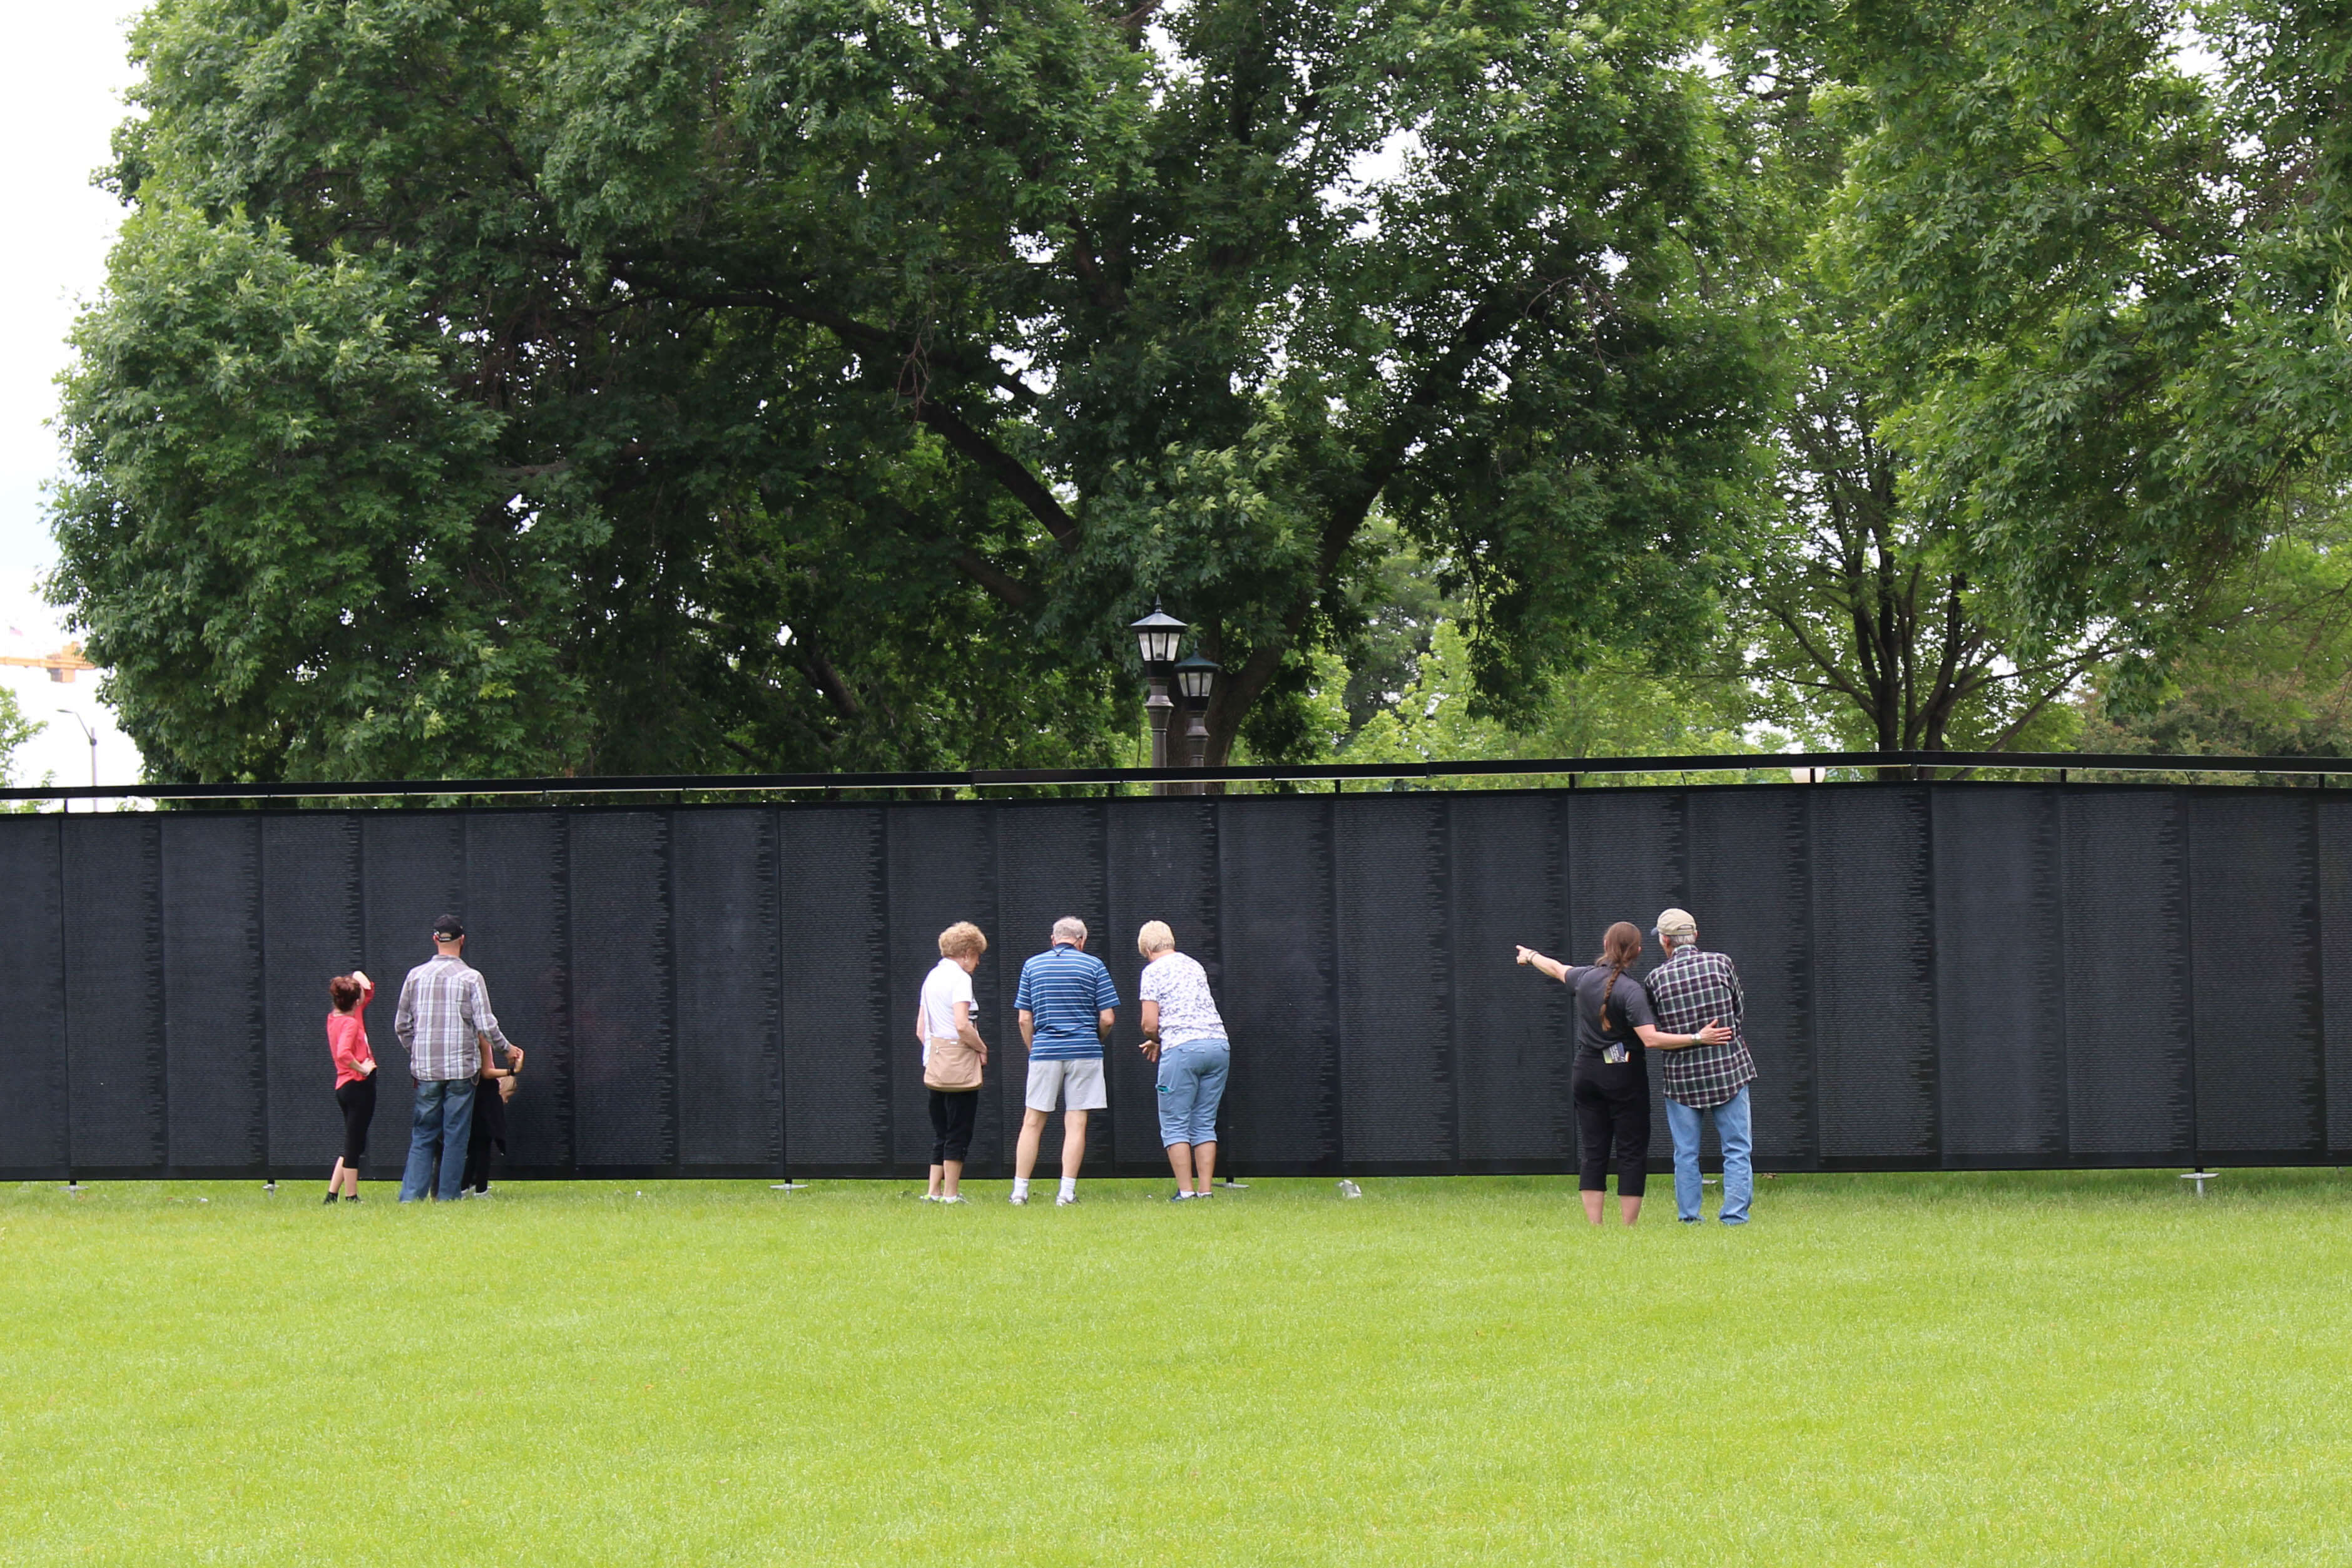 grassy field and replica of the Vietnam Wall.